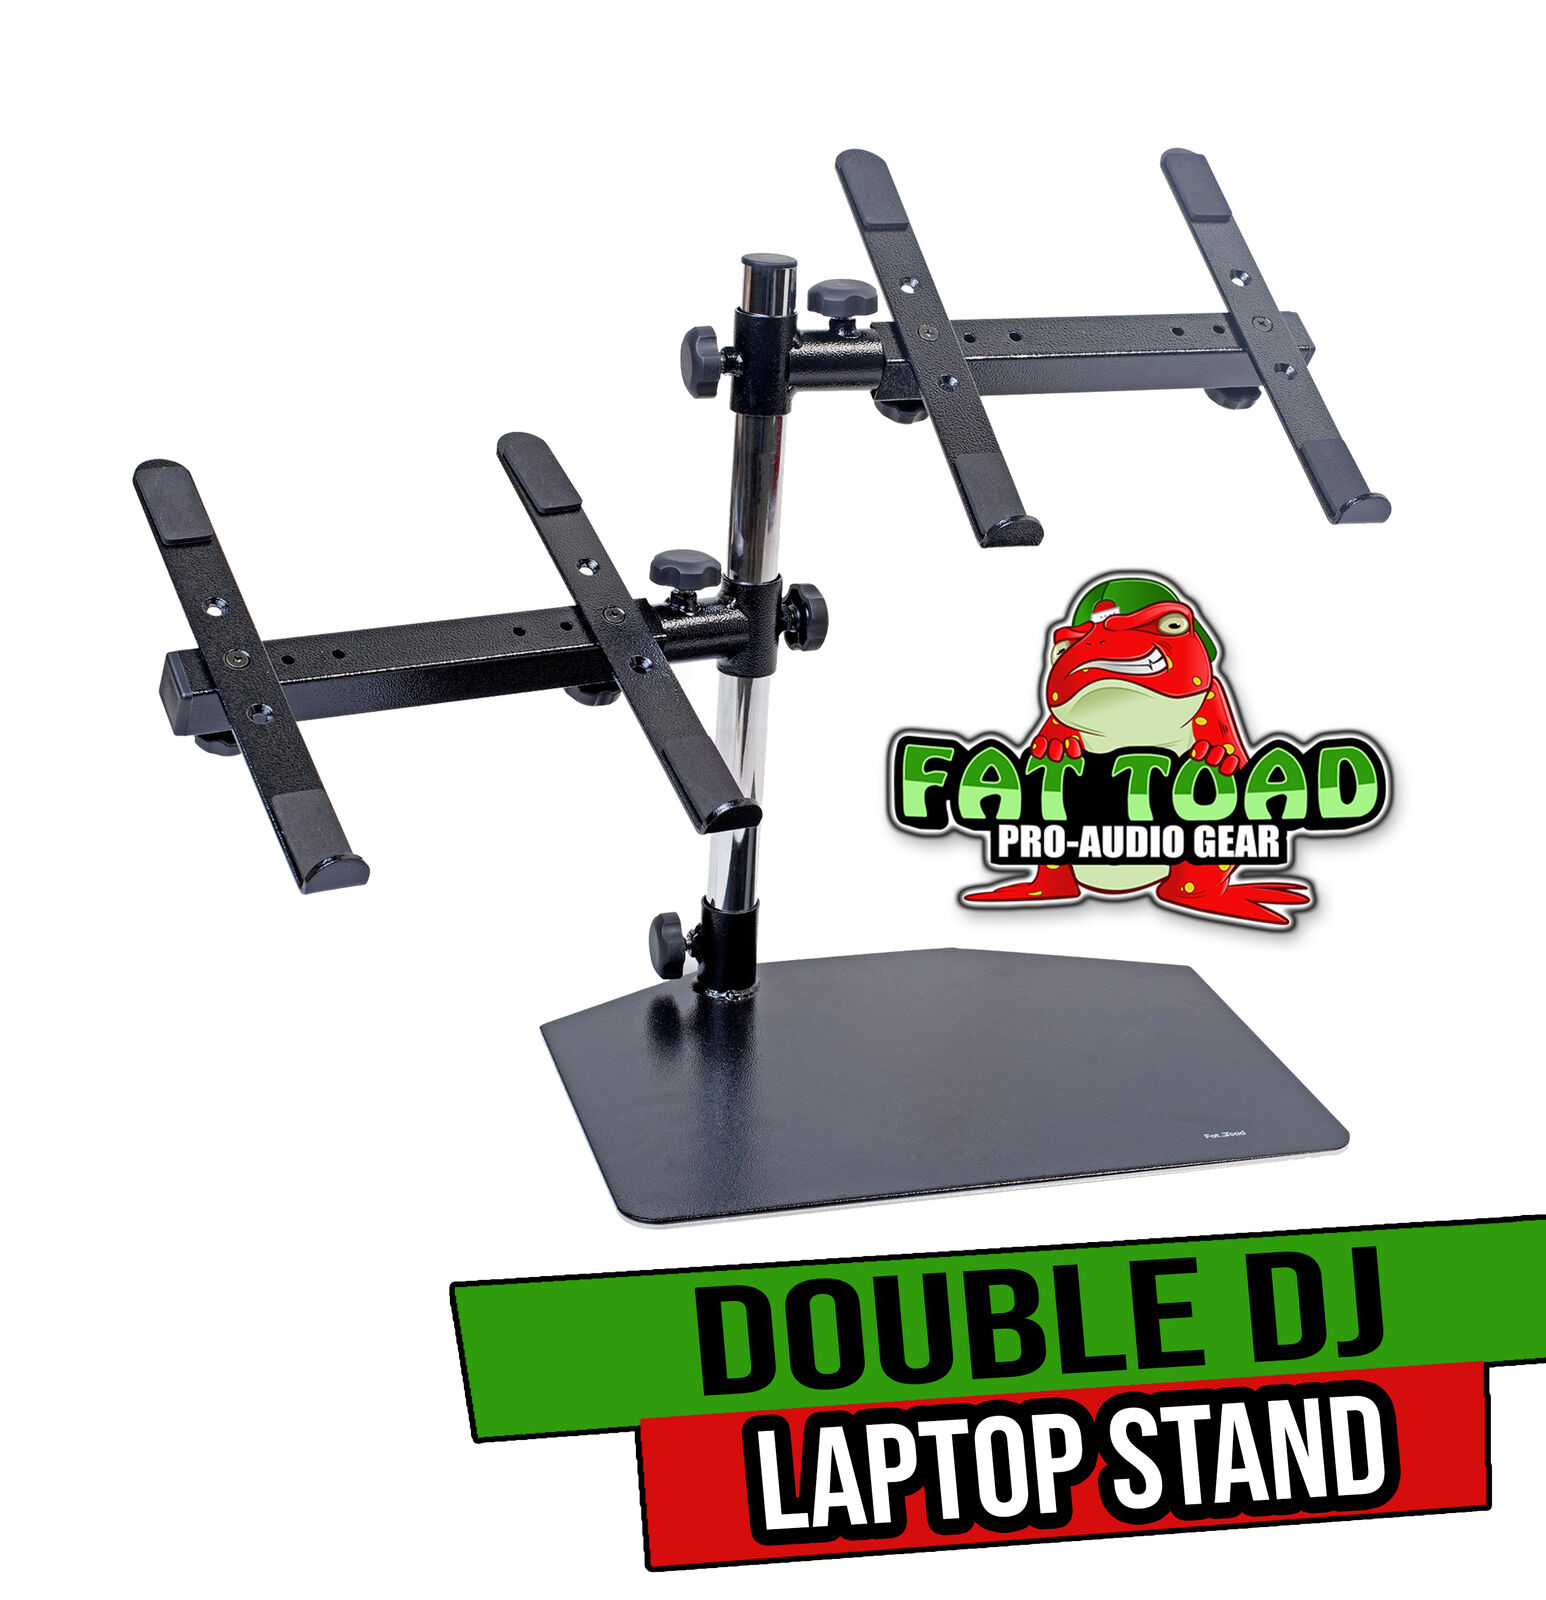 Double DJ Laptop Stand by FAT TOAD | 2 Tier PC Table Holder | Portable Computer